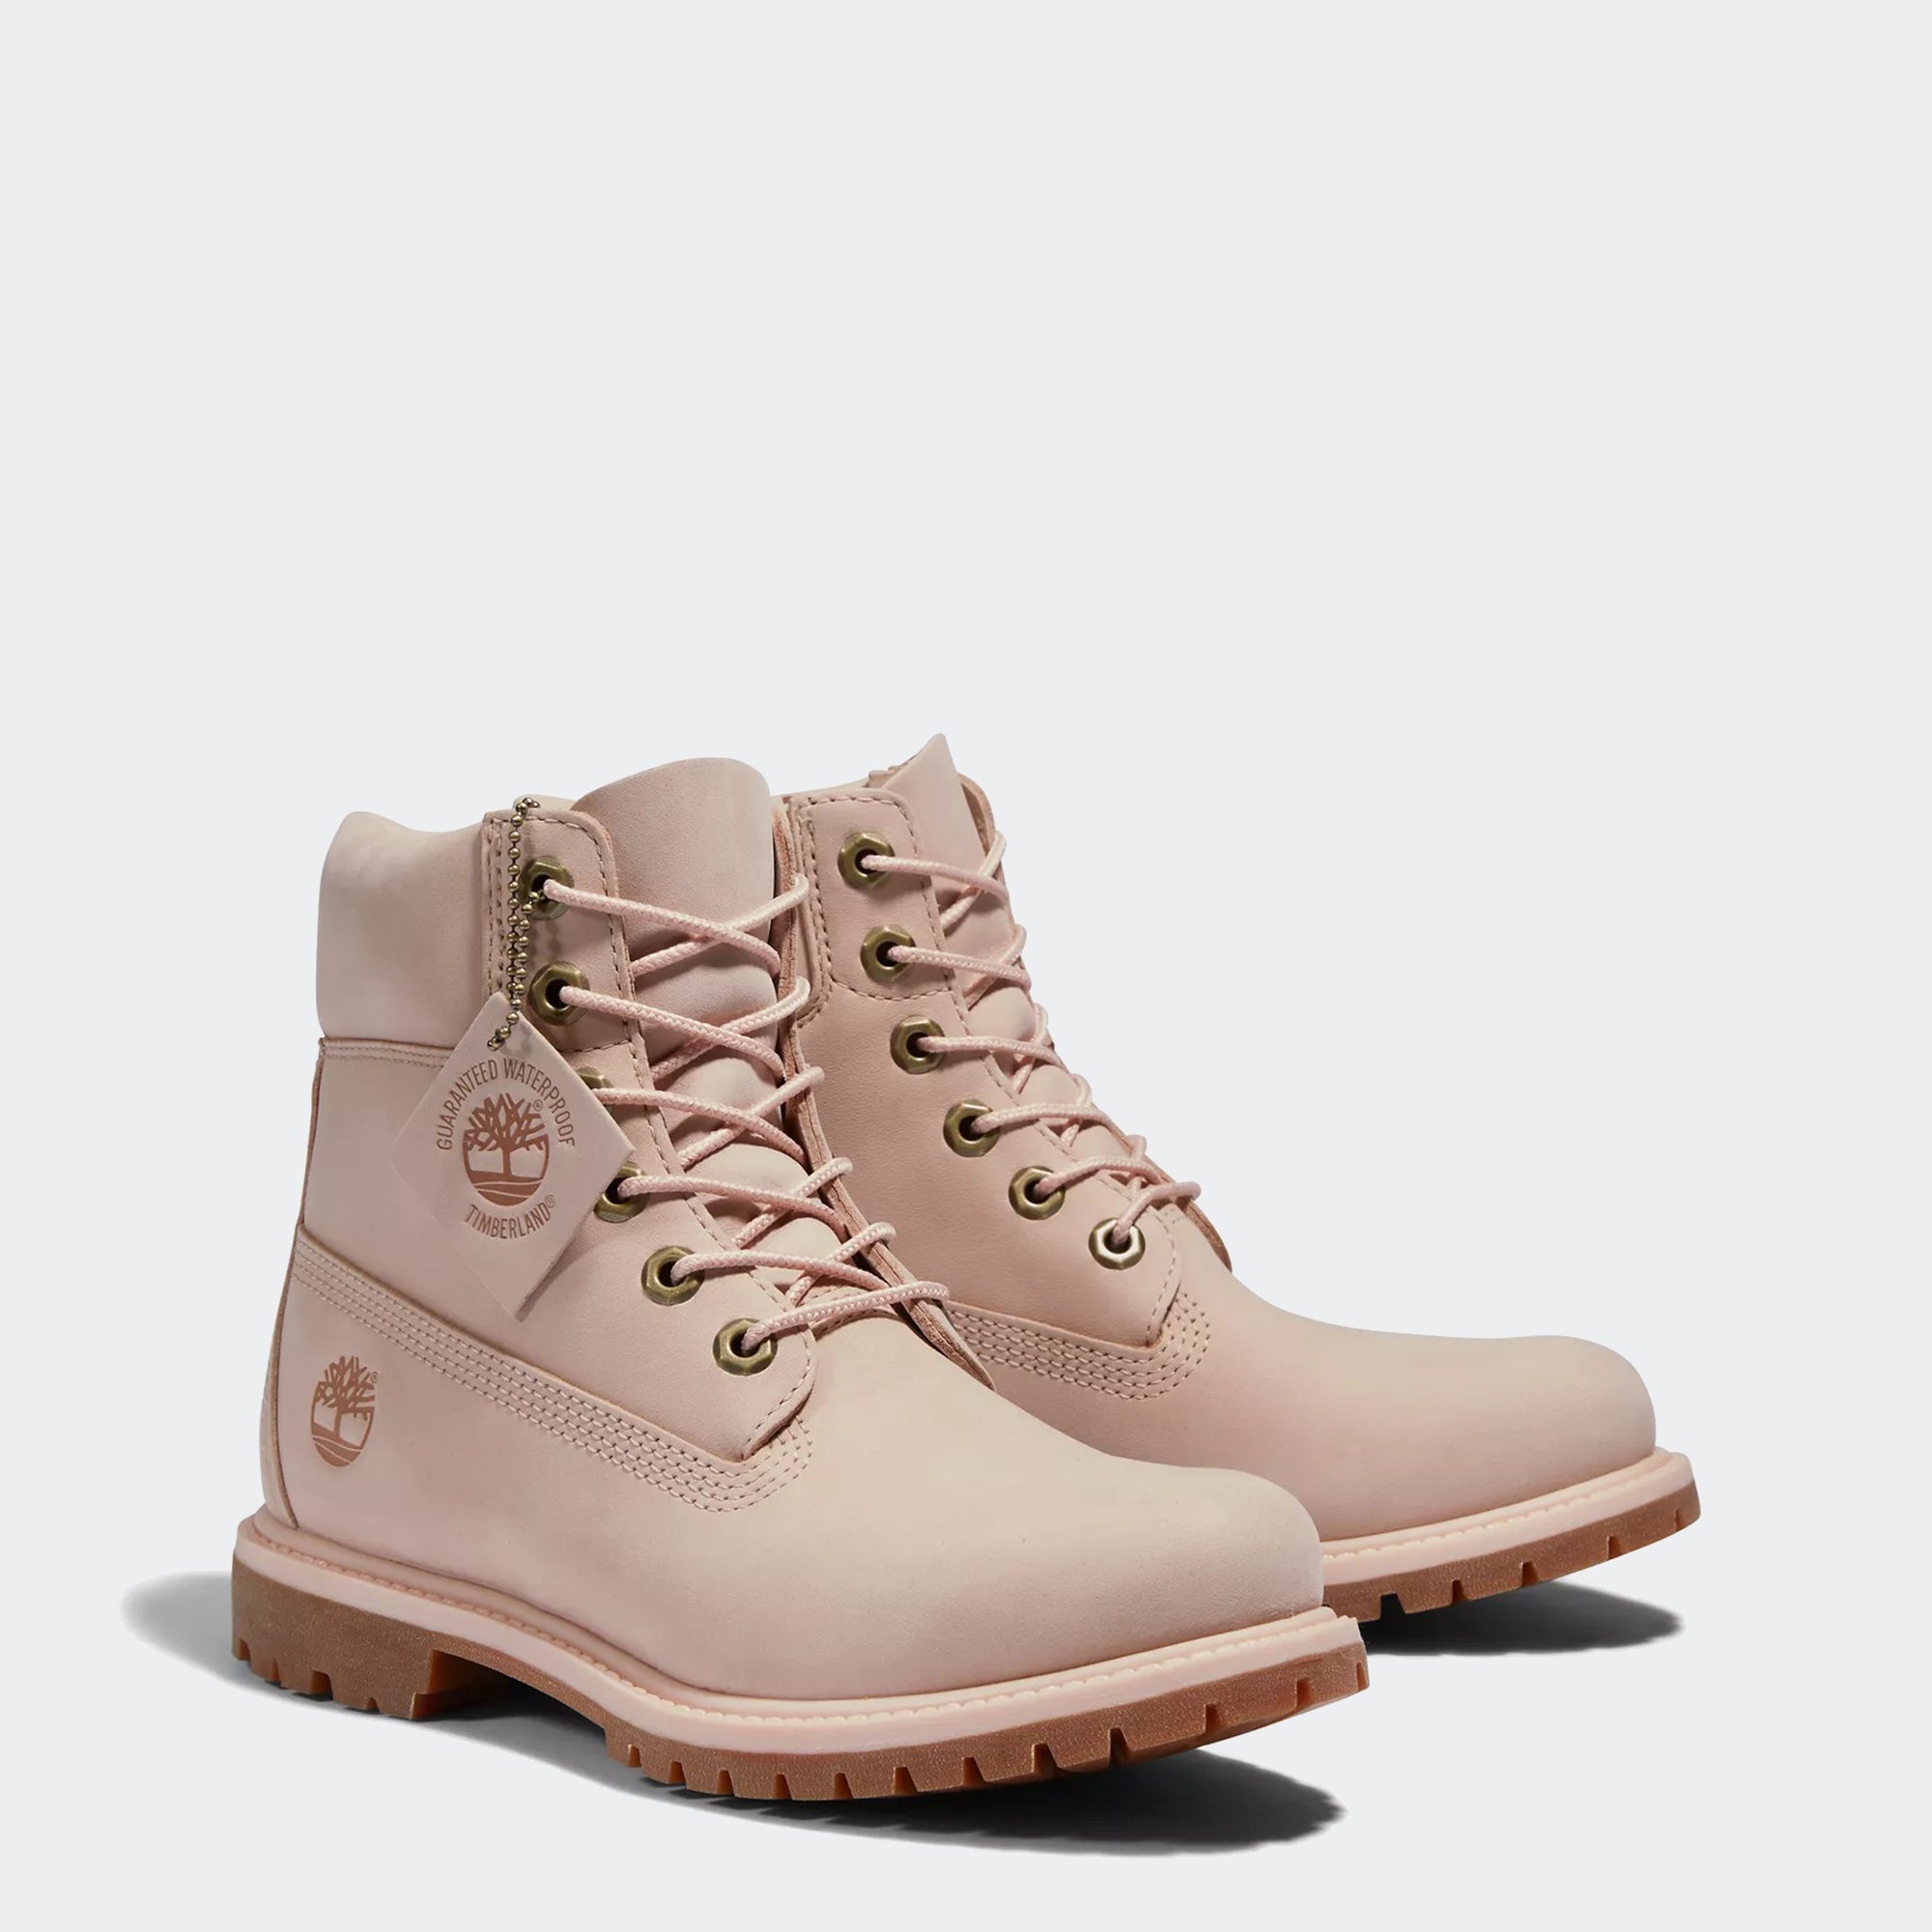 Extremo Increíble Engreído Timberland 6-Inch Waterproof Boots Light Pink | Chicago City Sports